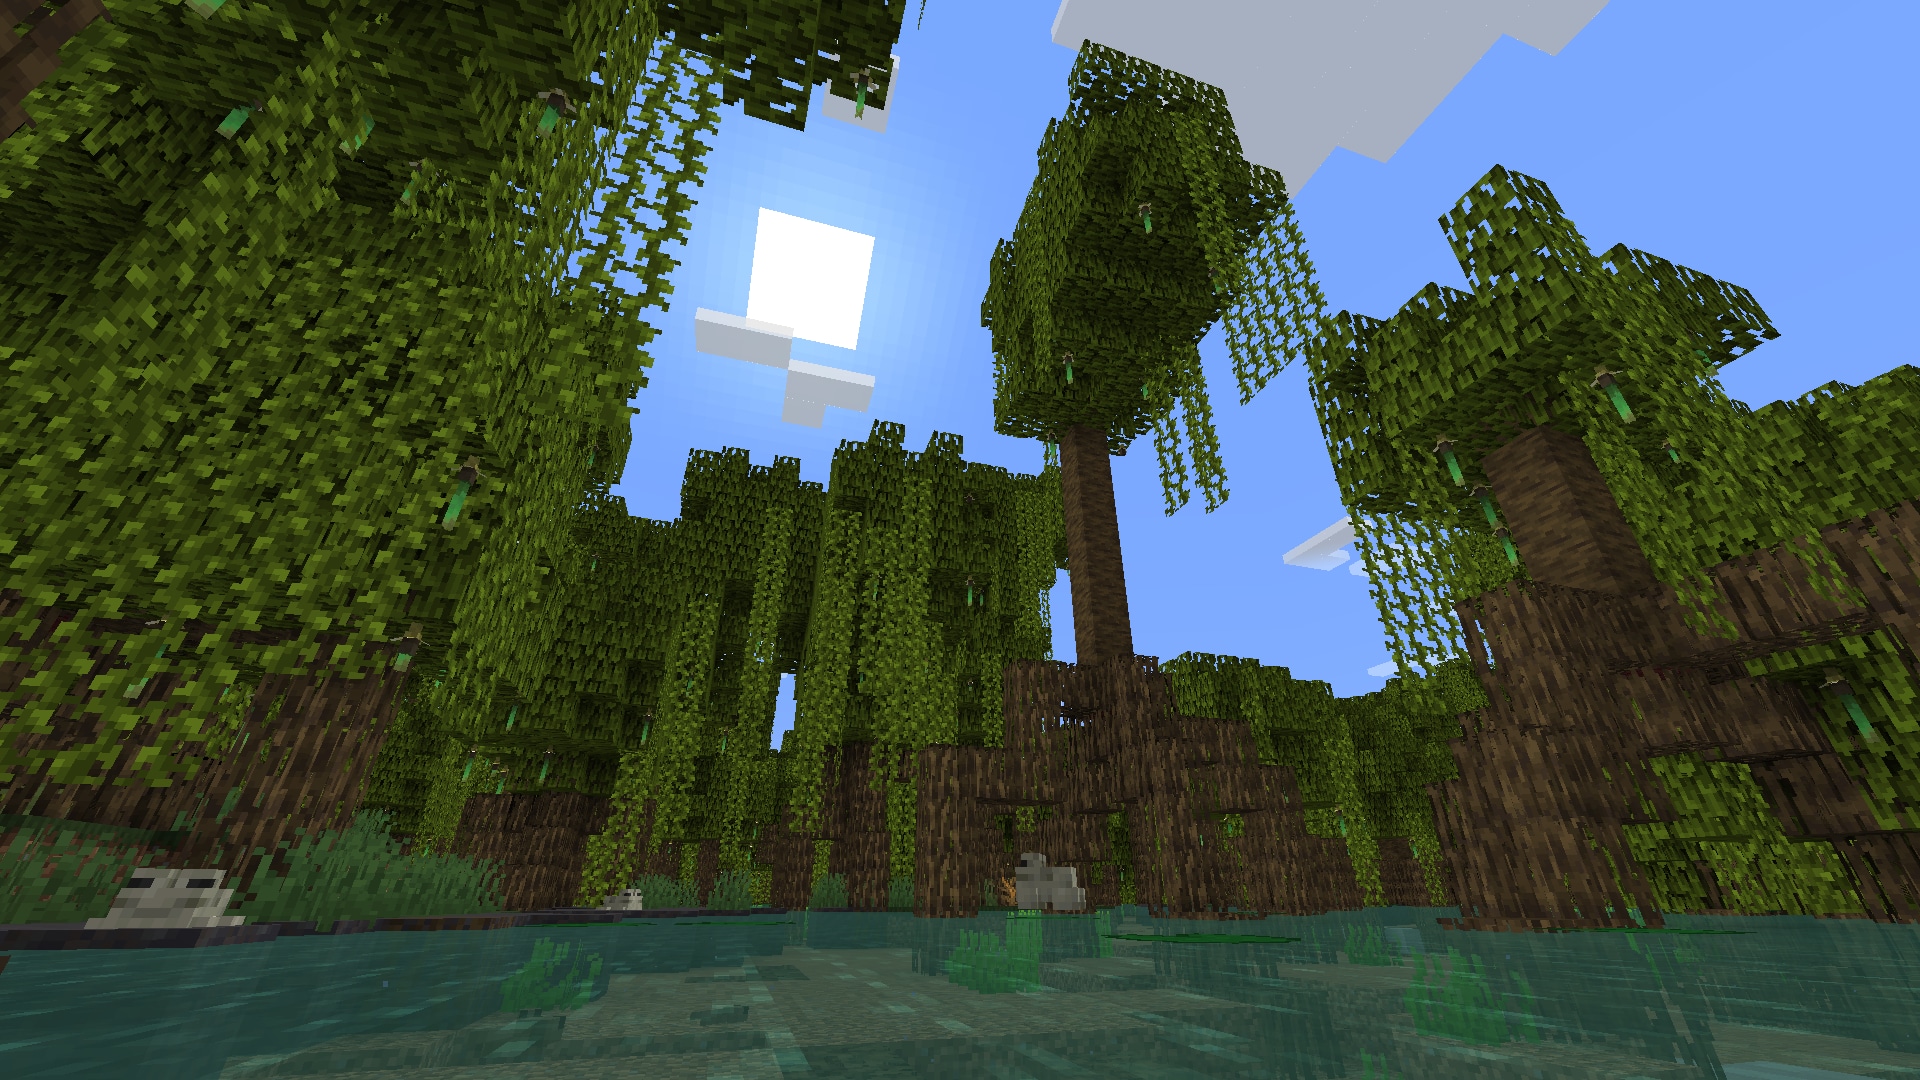 Mangrove trees growing in a swamp biome